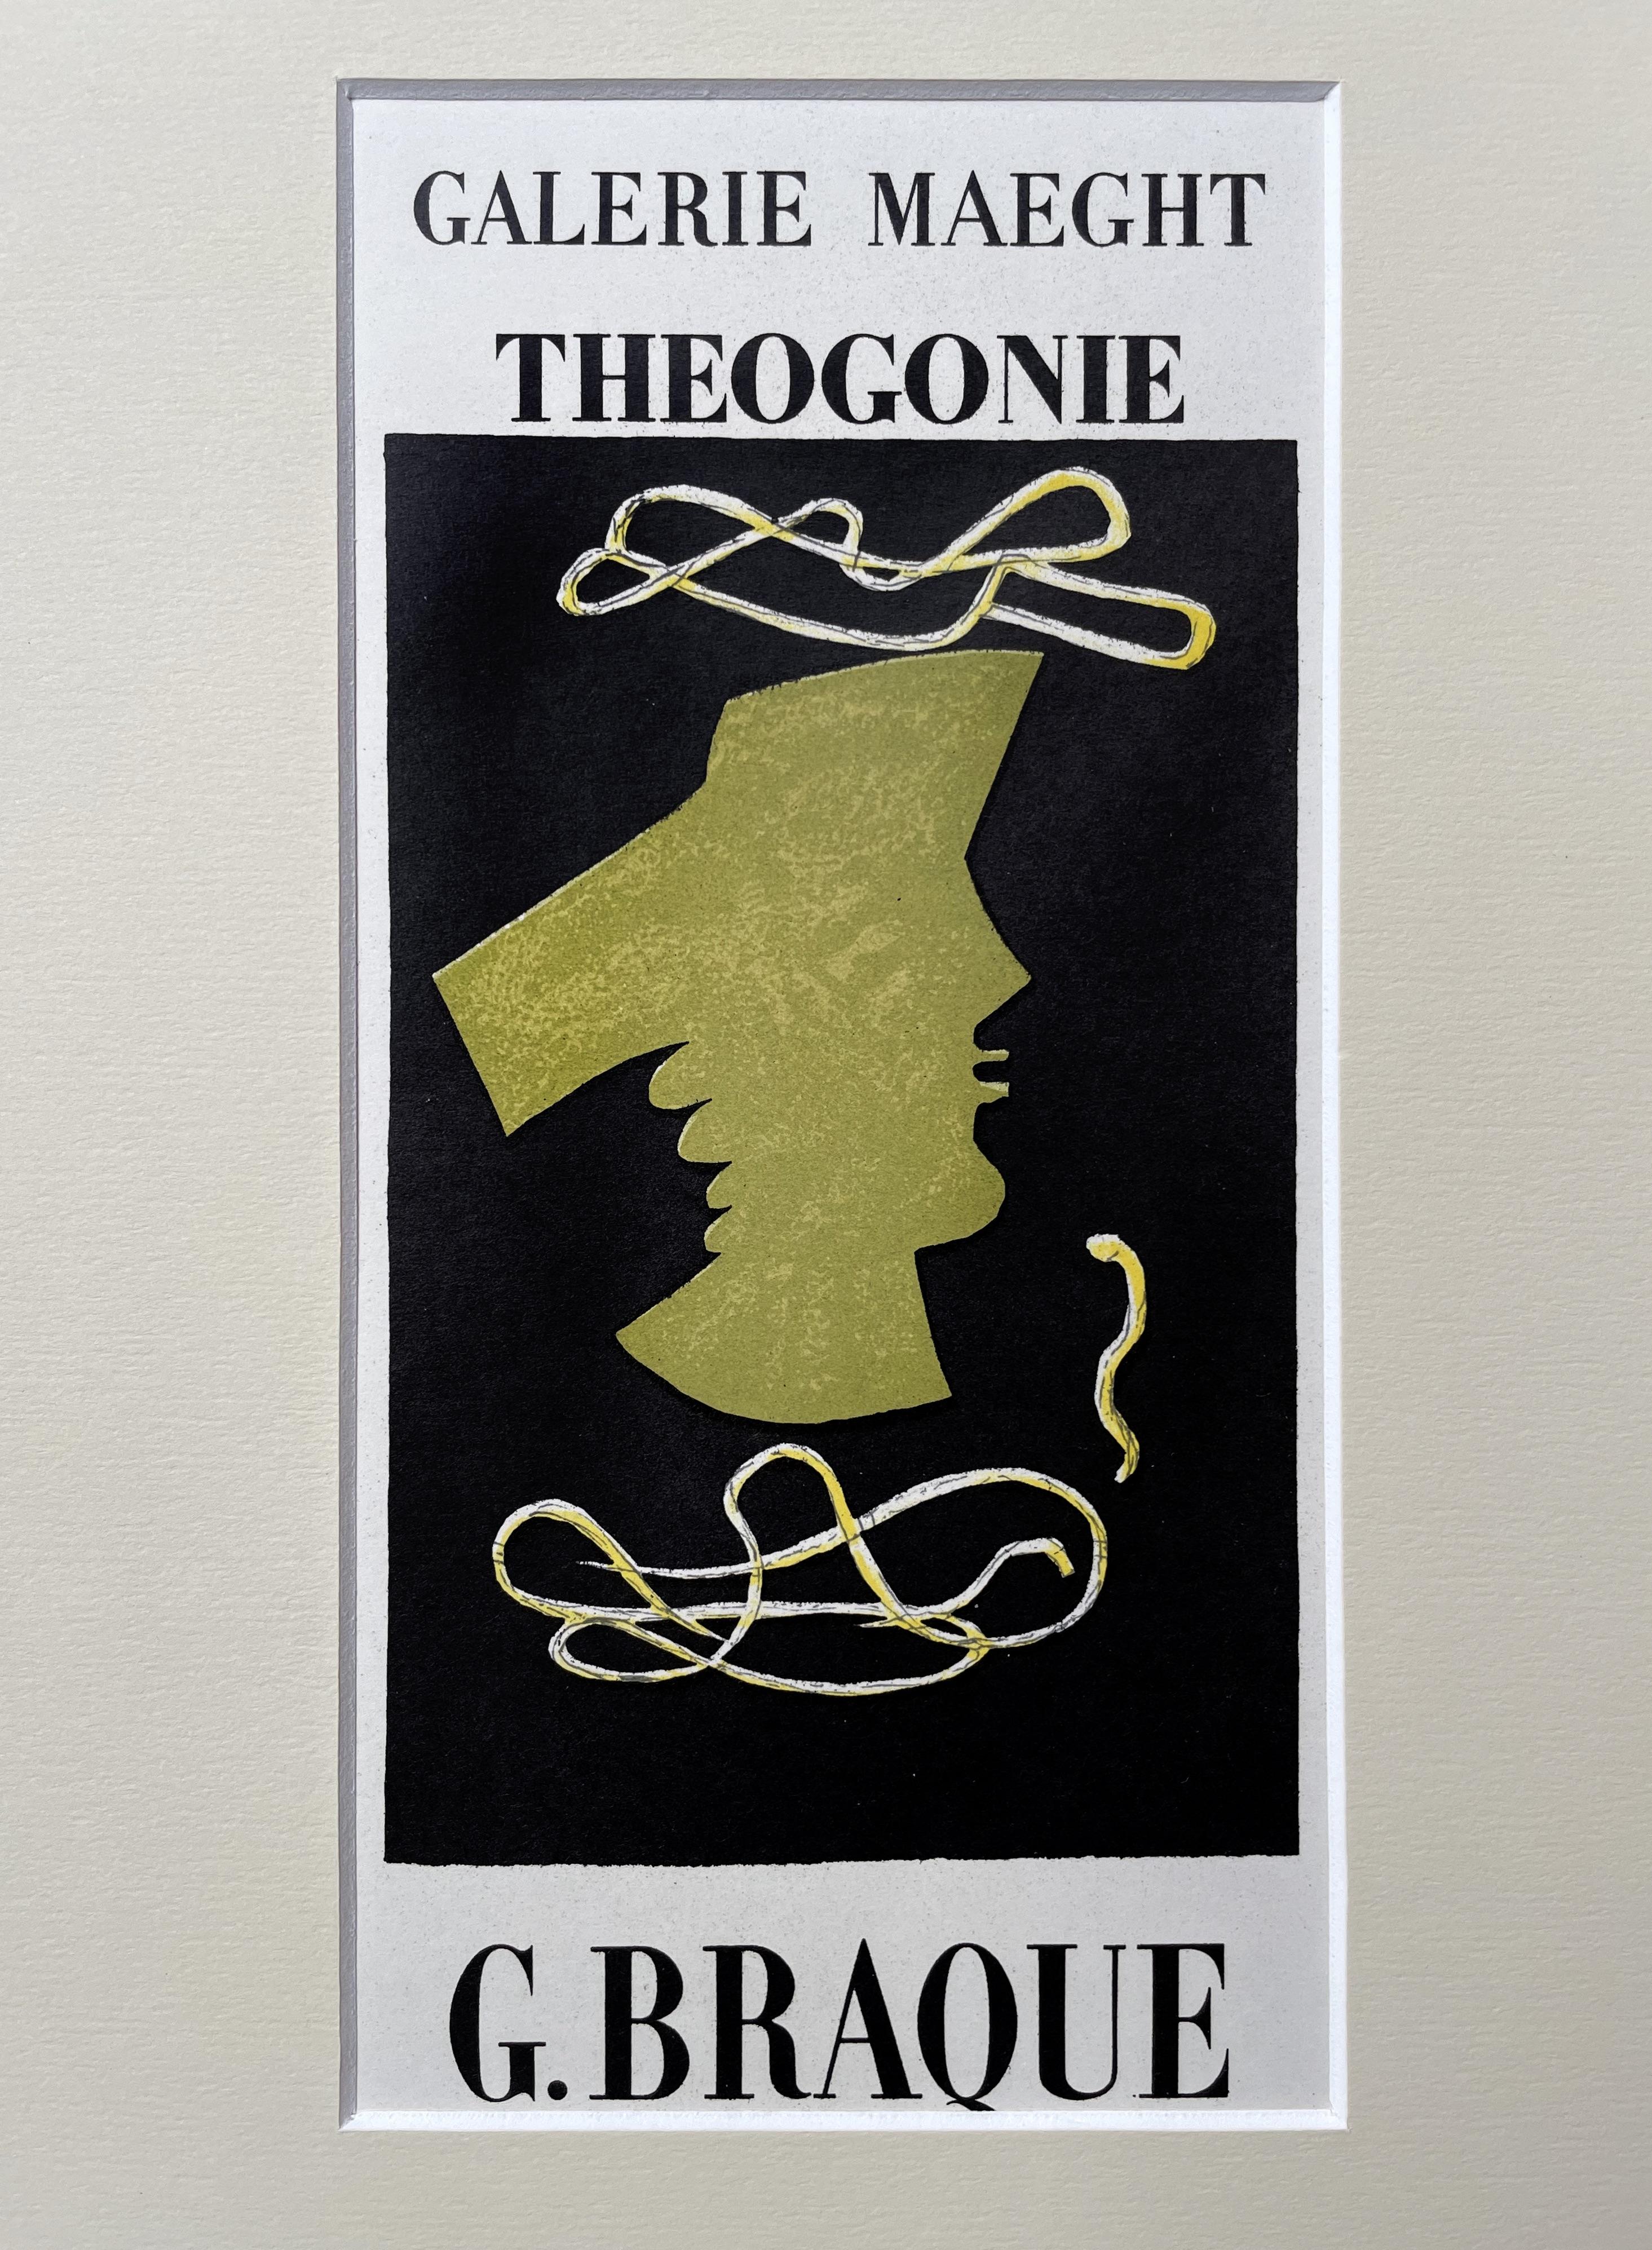 Theogonie Exhibition Poster by Georges Braque, Modernist Mourlot Lithograph 1959 - Cubist Print by (after) Georges Braque